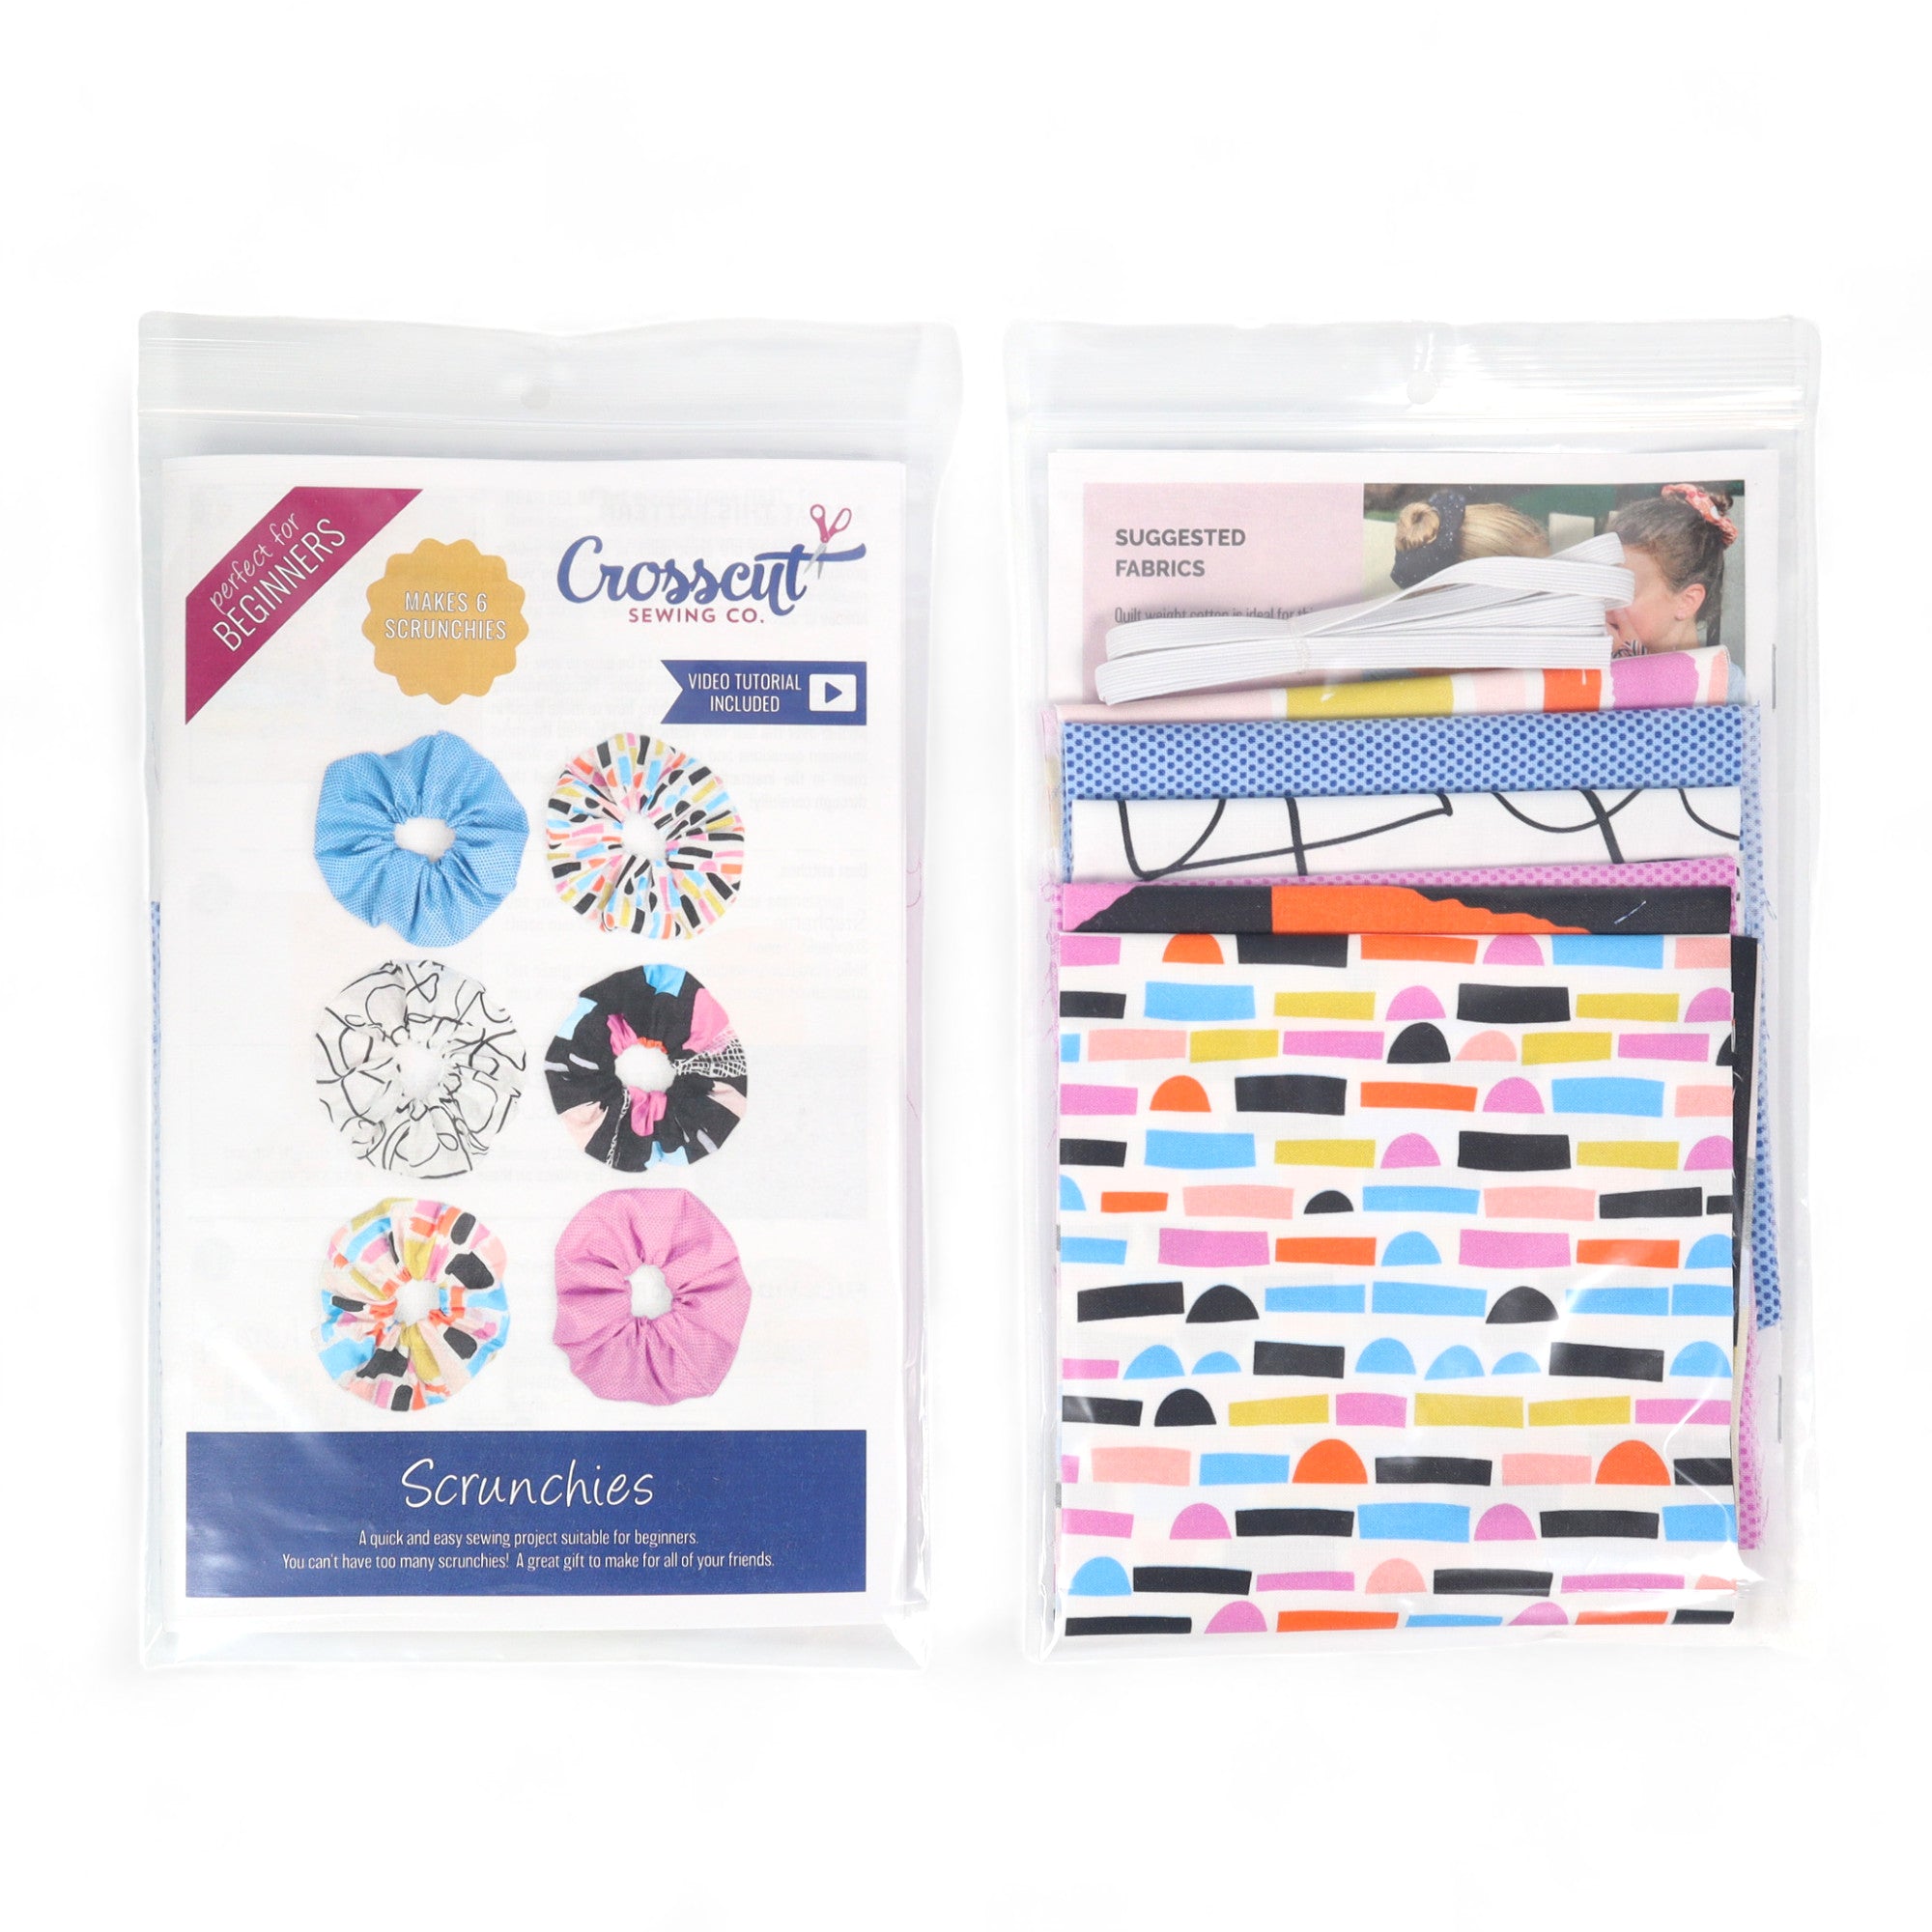 Crosscut Sewing Co. Scrunchie Sewing Kit - Abstract Black